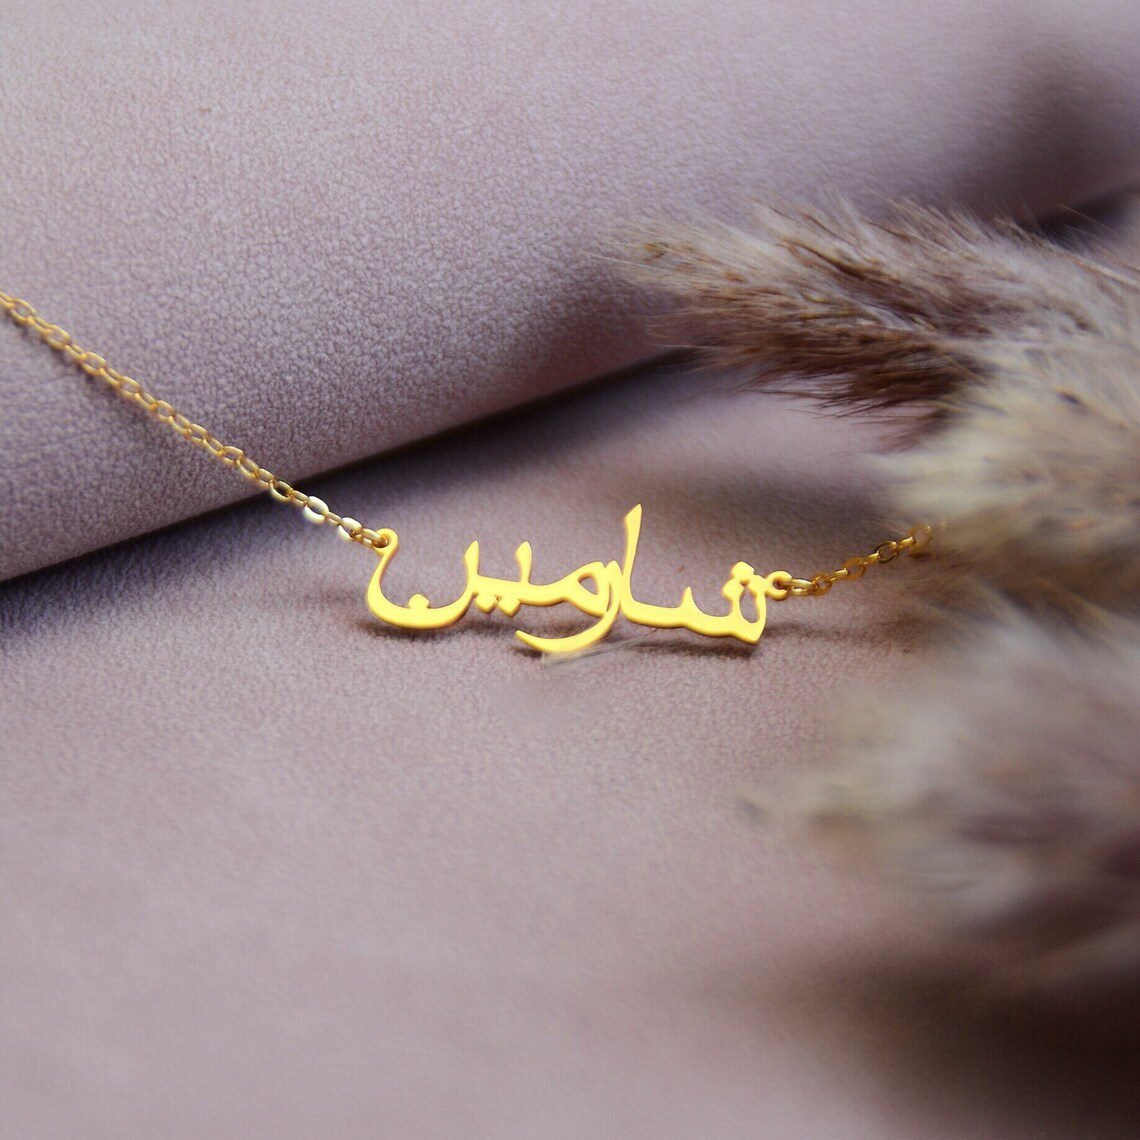 Buy Antiquestreet Name Chain Arabic name Necklace in Pendant Gold Plating  Chain With Pendant Gift Box for Girls (Gold) at Amazon.in